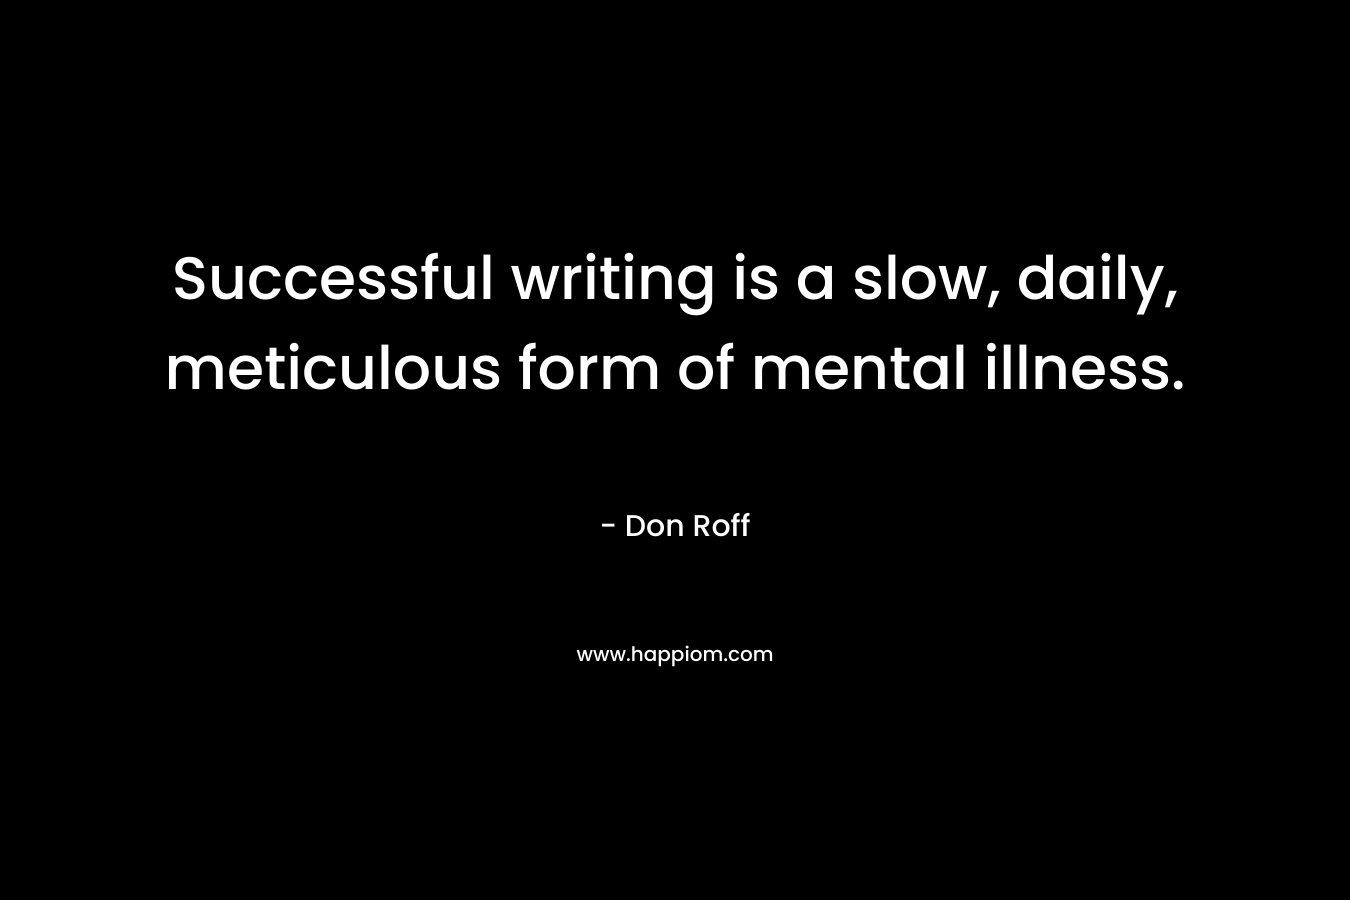 Successful writing is a slow, daily, meticulous form of mental illness. – Don Roff